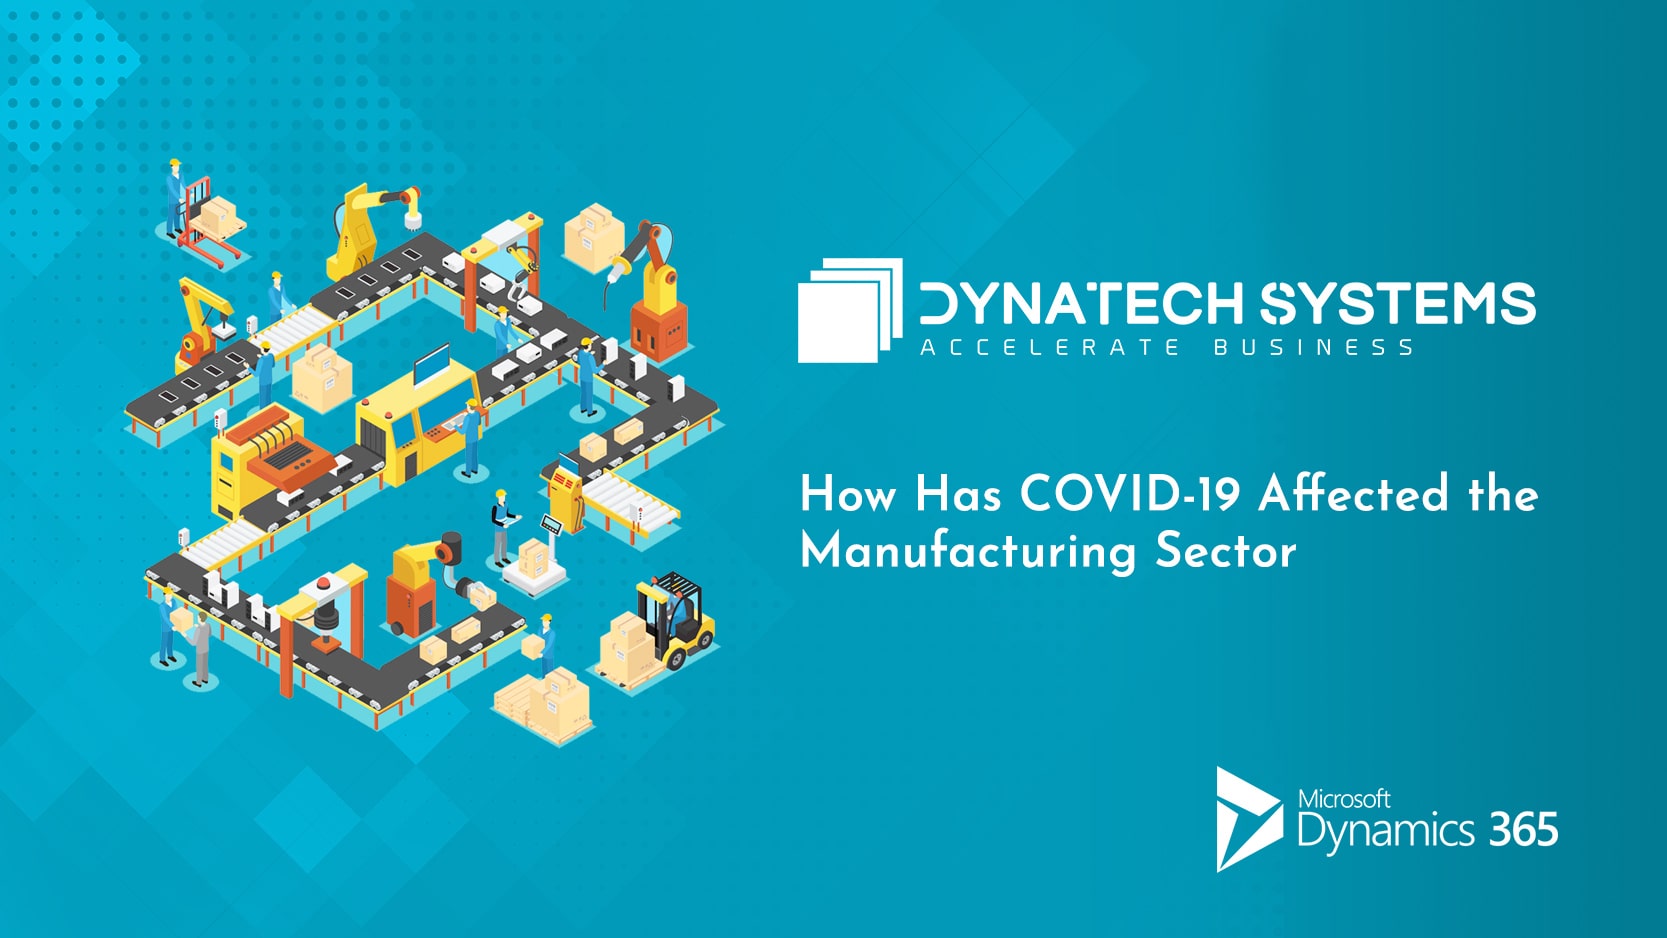 How Has COVID-19 Affected the Manufacturing Sector